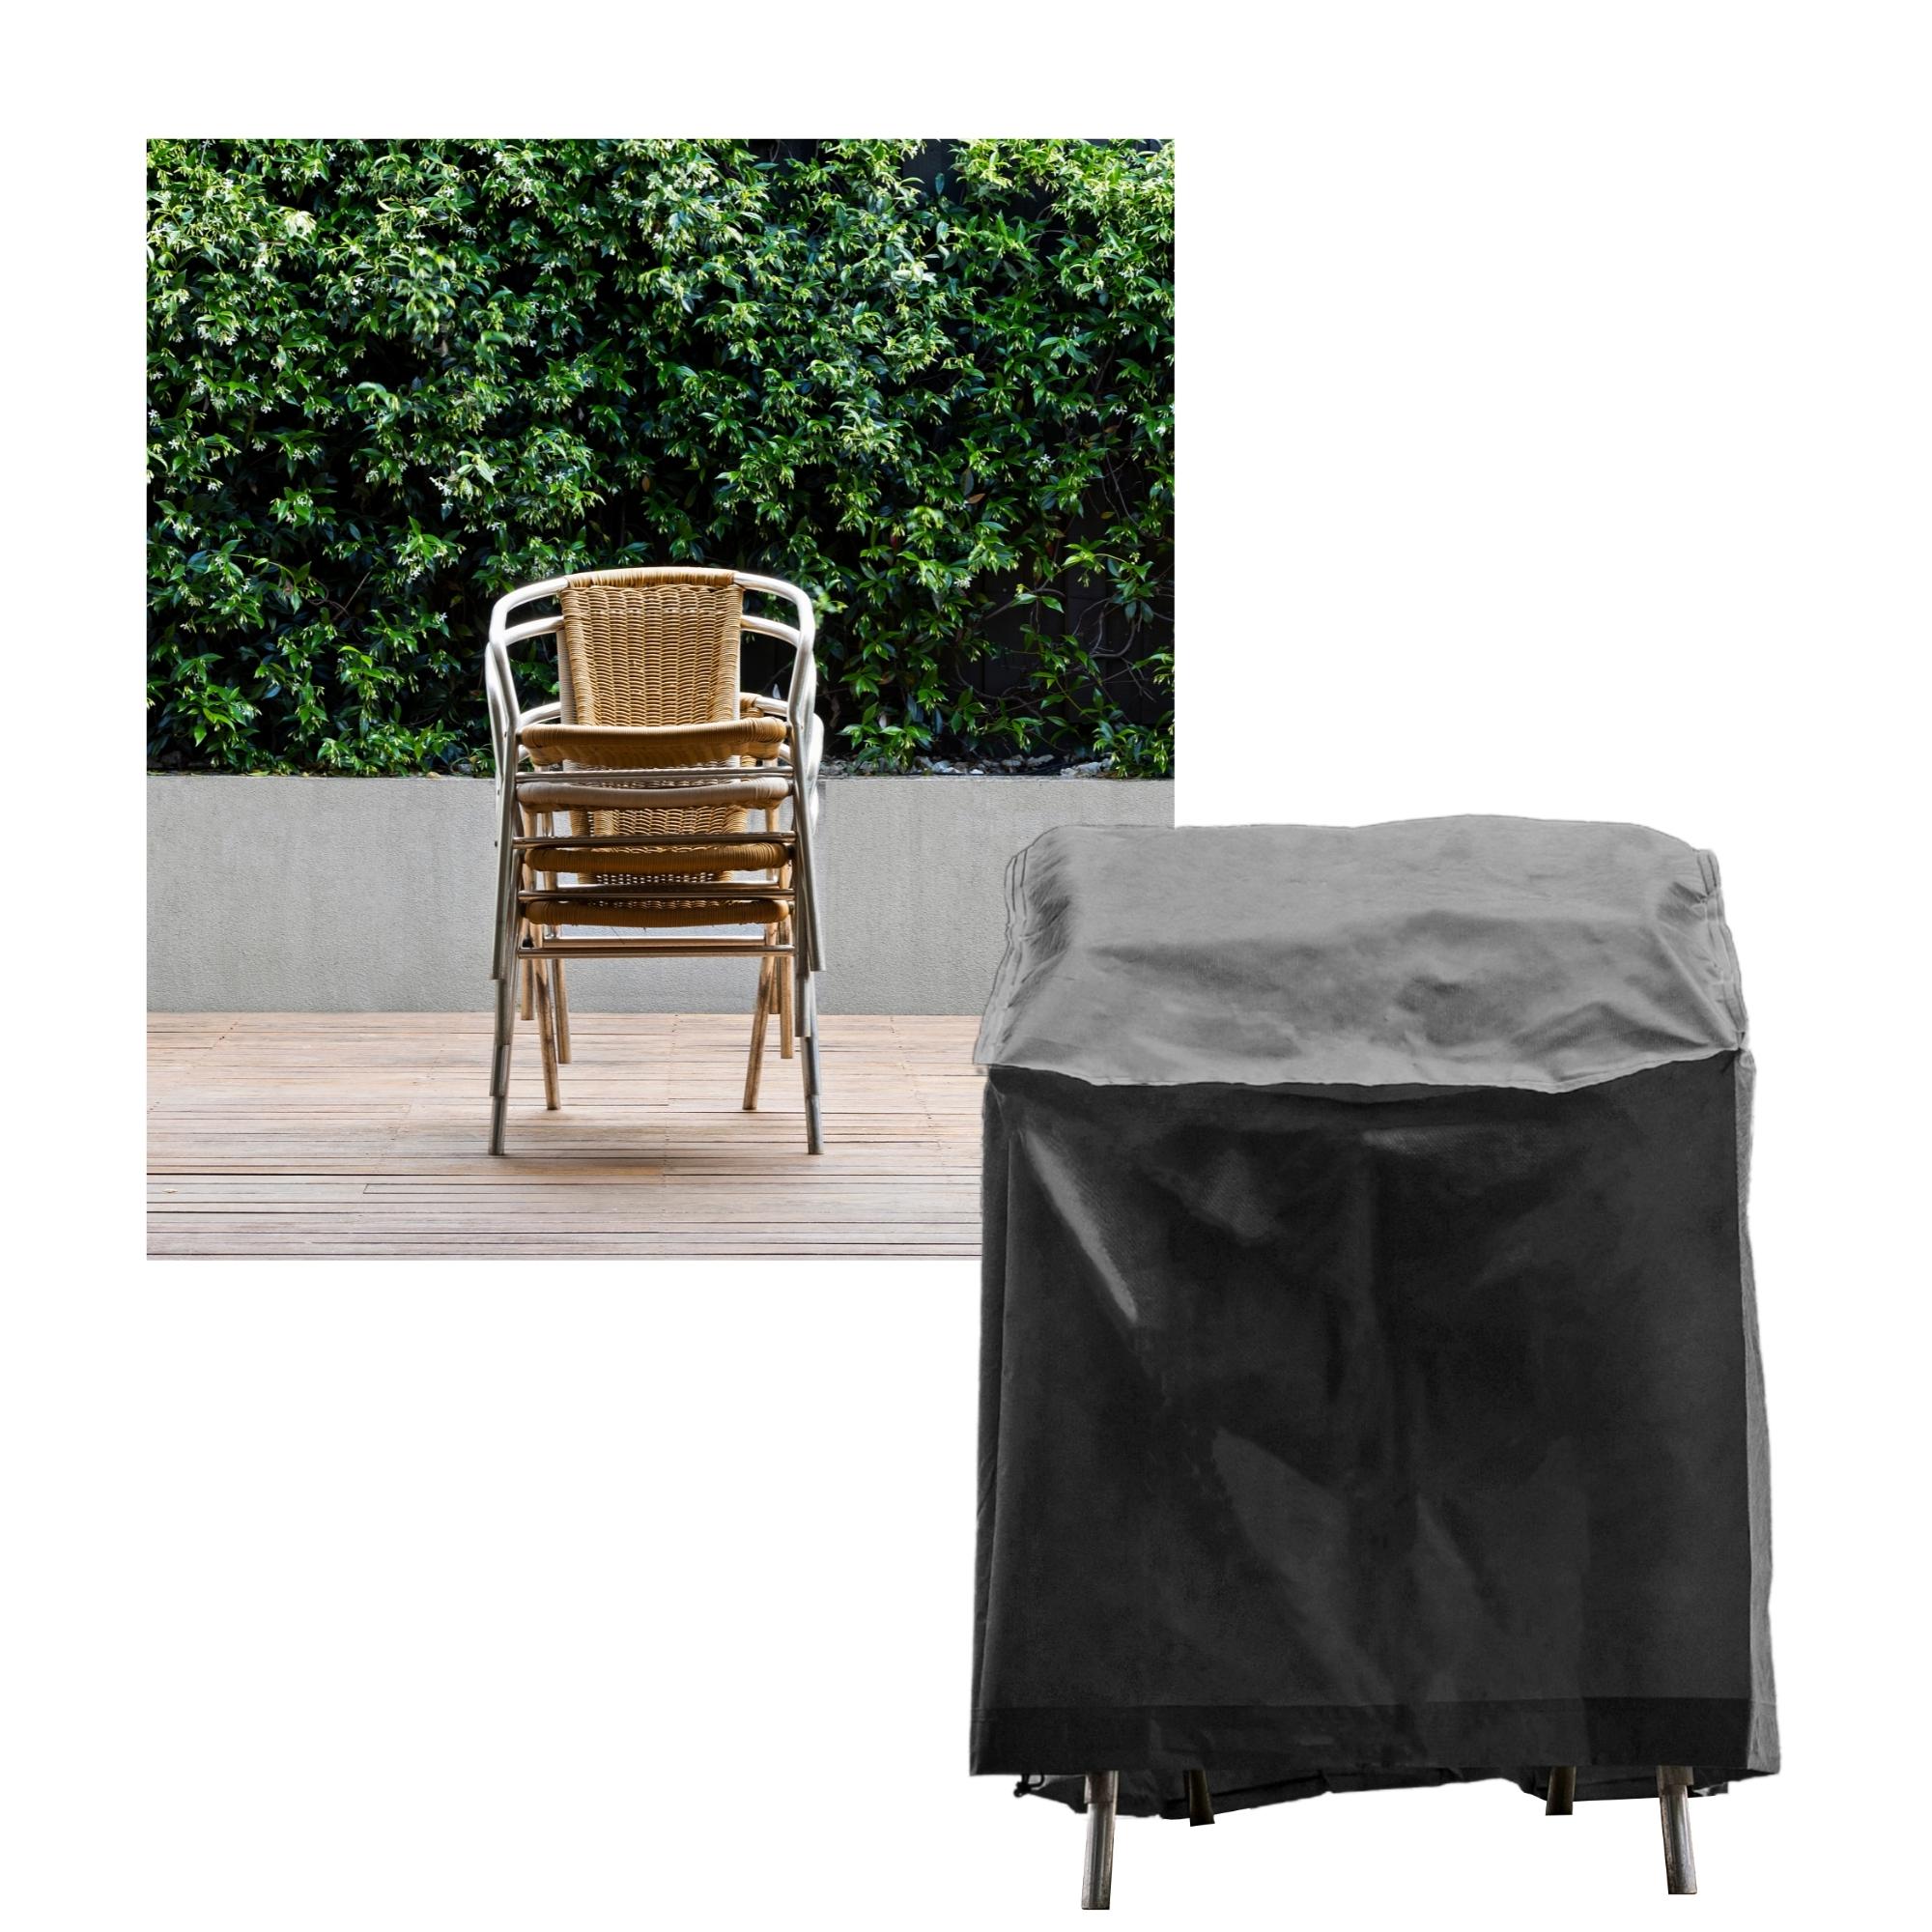 Outdoor Chair Cover Protect Your, Frontline Outdoor Furniture Covers